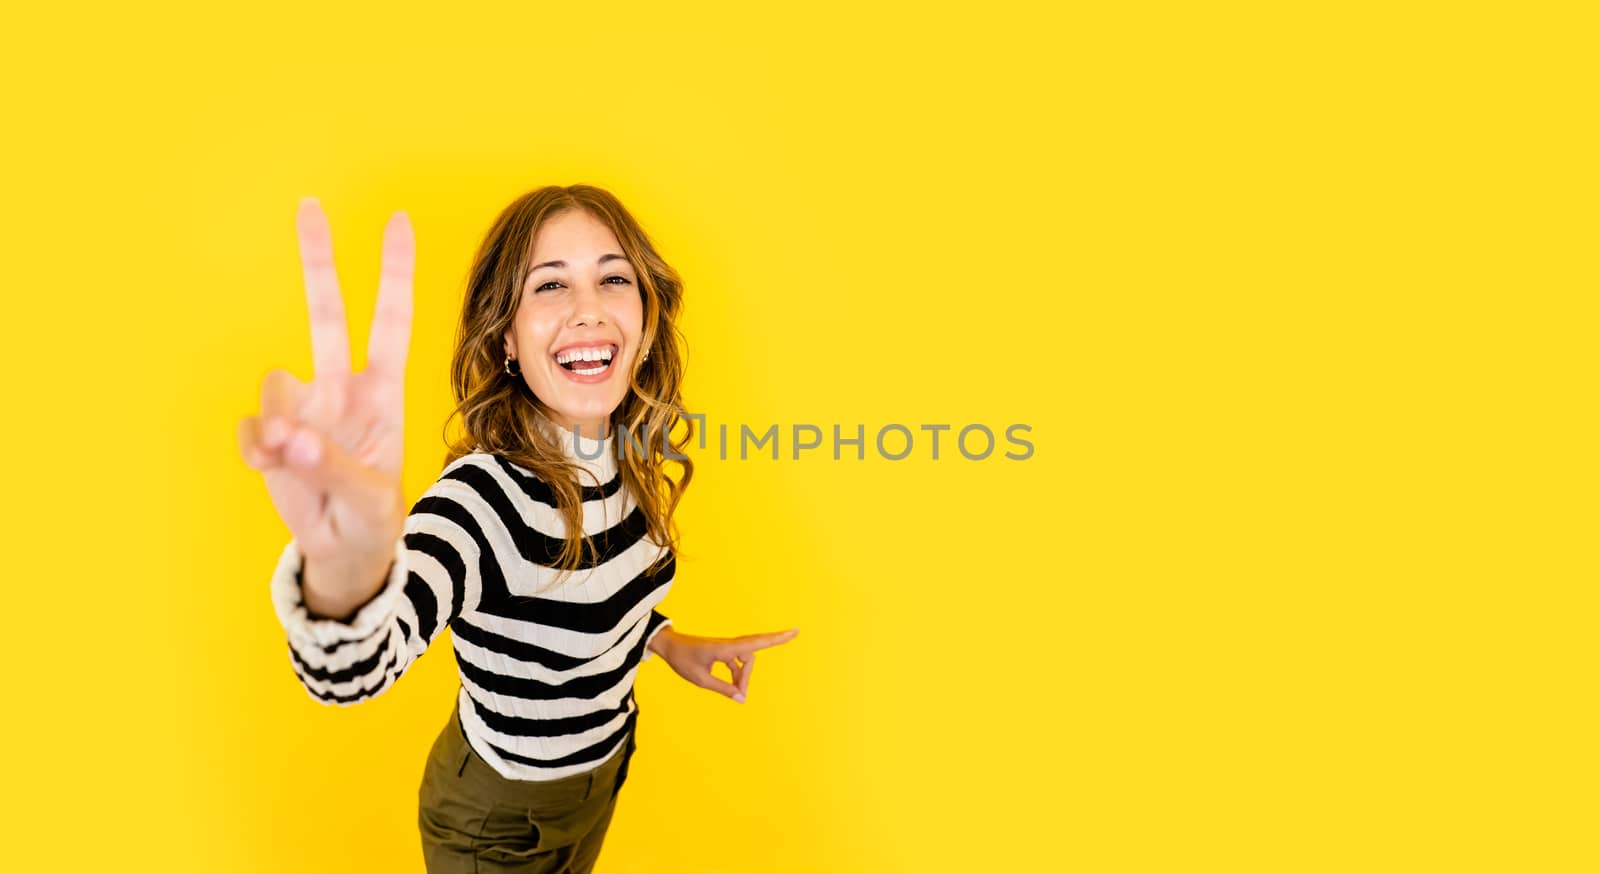 Cute happy young woman with black and white striped shirt does the victory sign looking and smiling at the camera - Studio shot of female single millennial in positive and confident pose